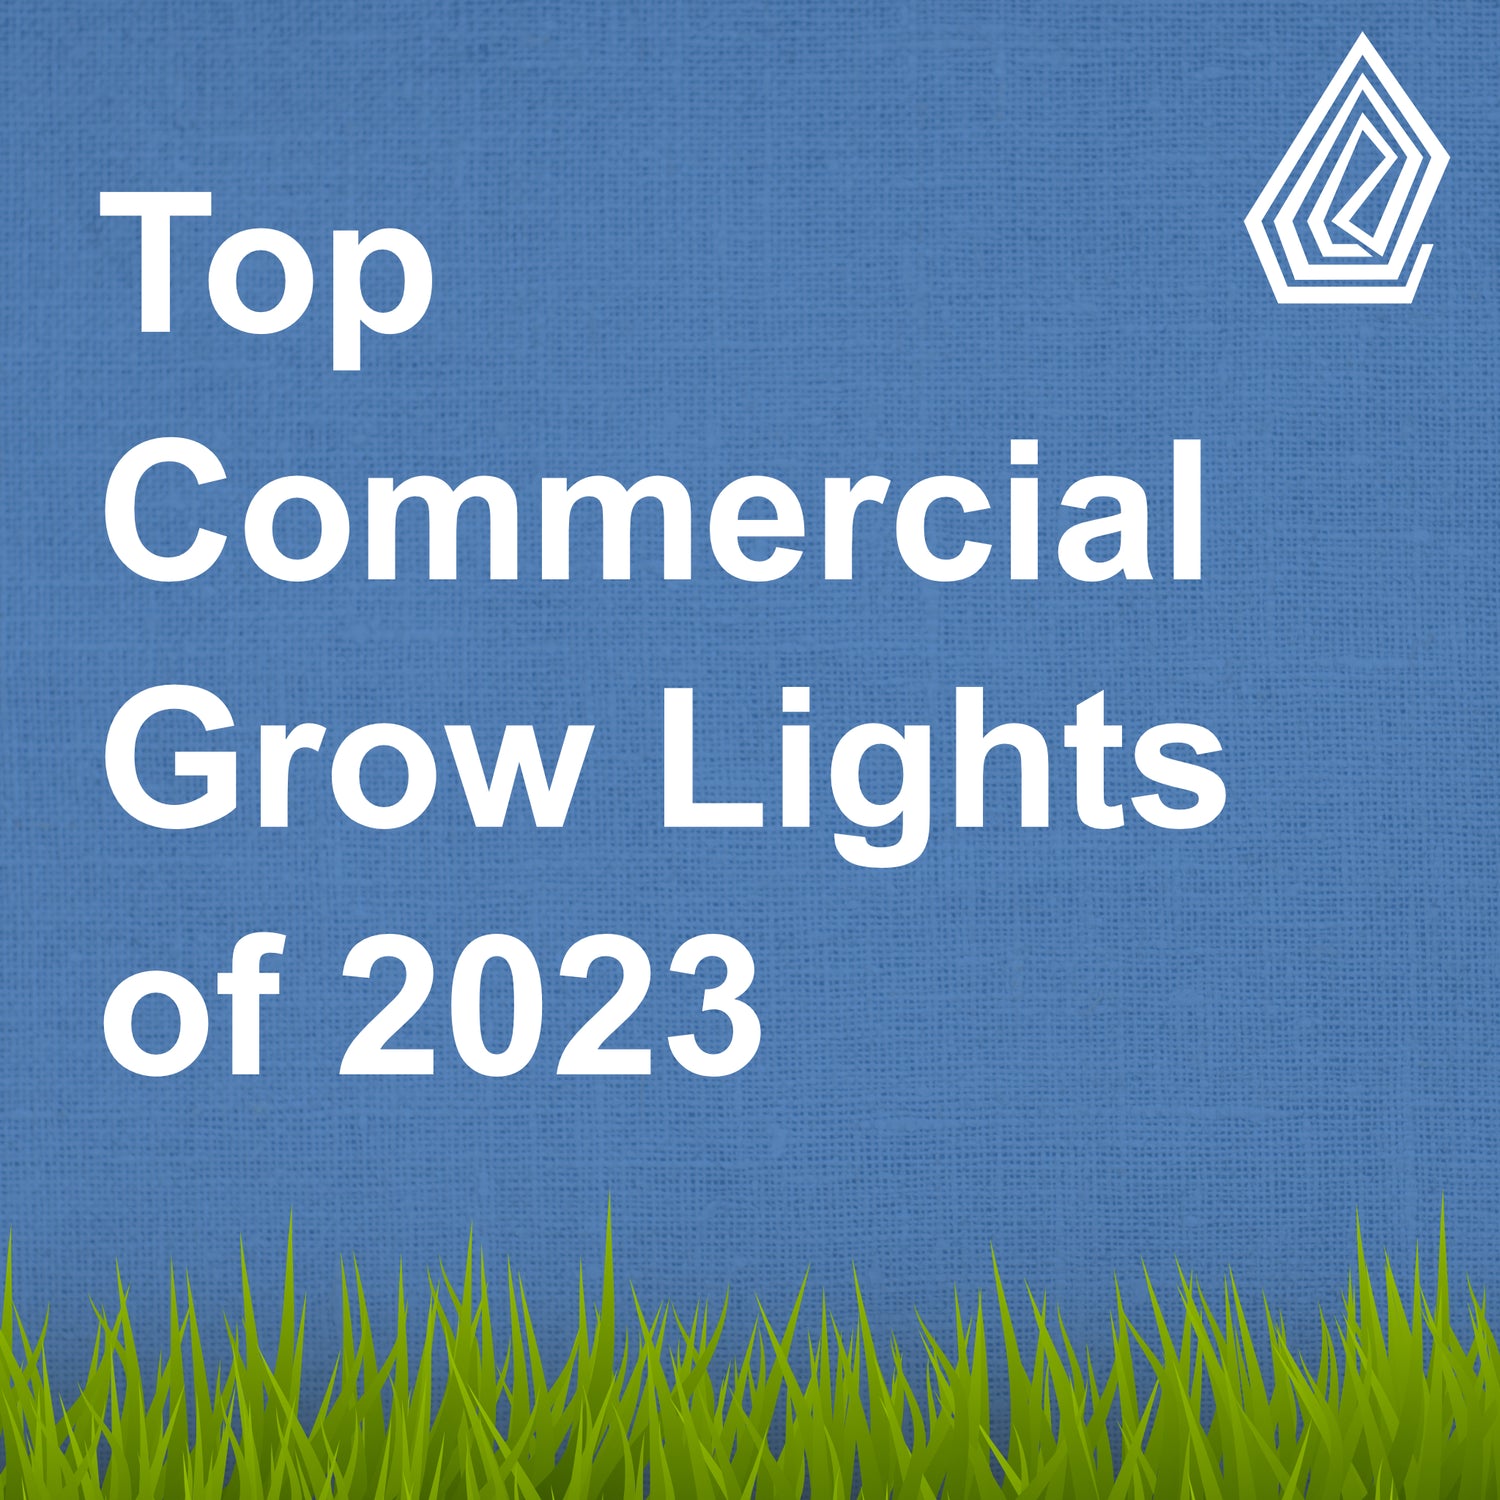 Top Commercial Grow Lights of 2023